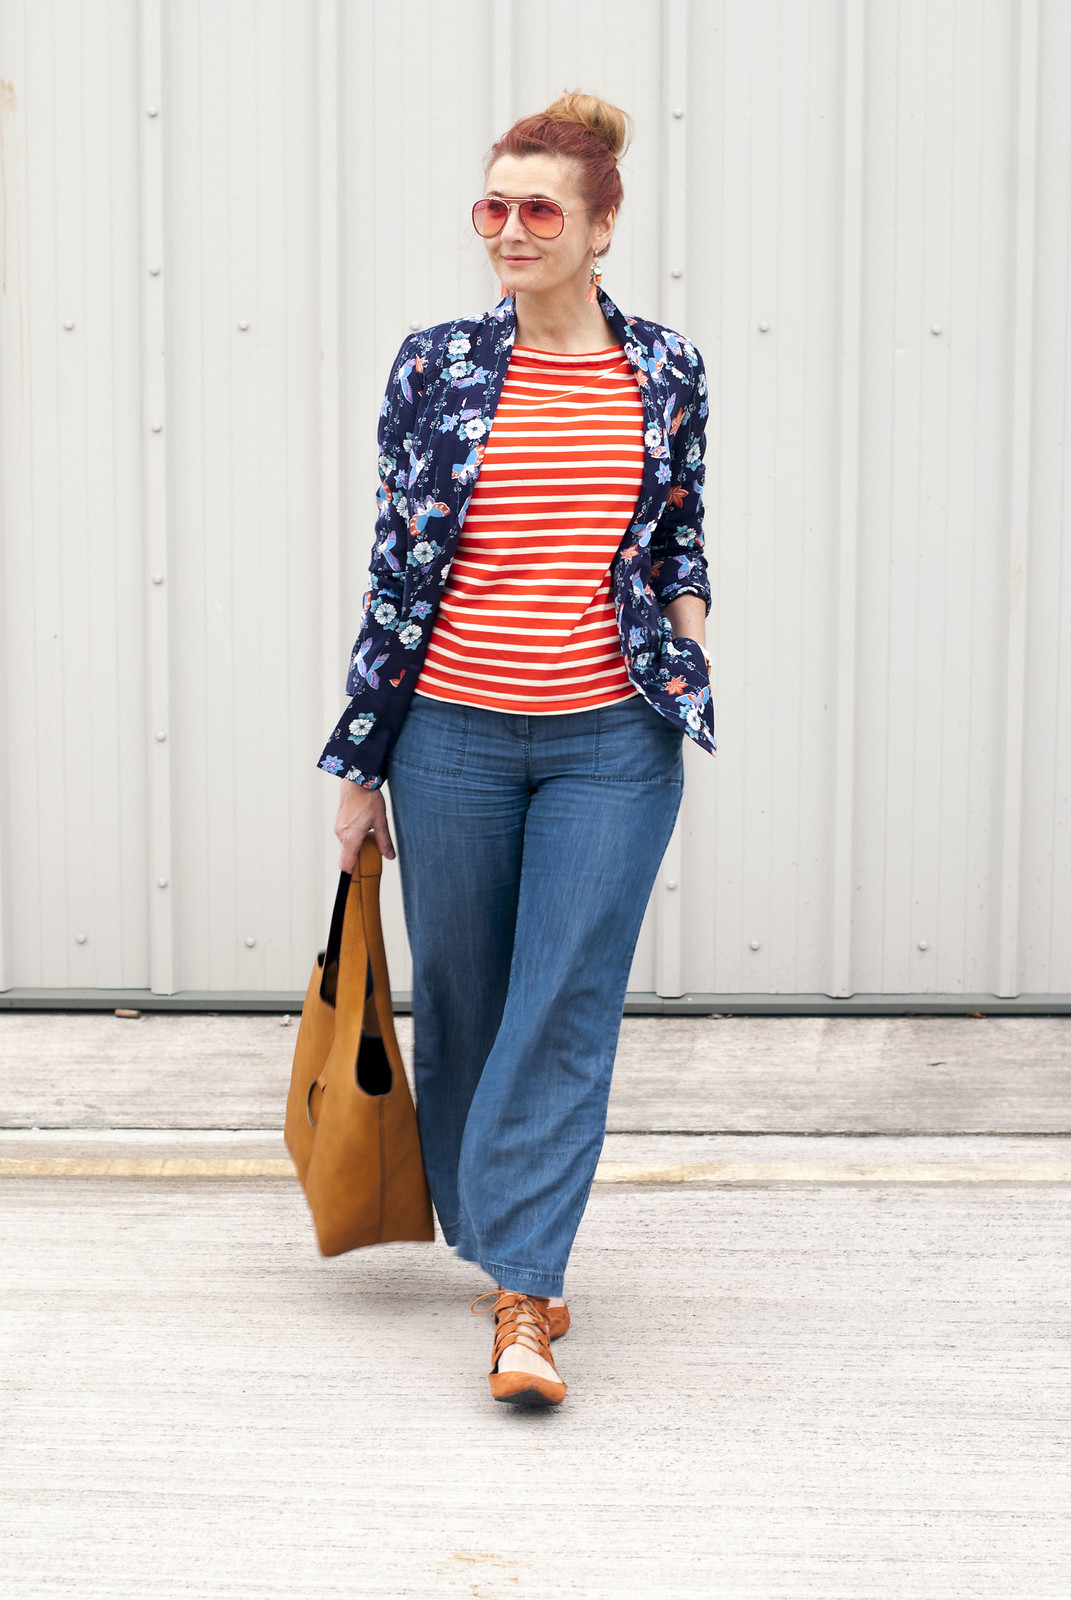 Summer style mixed stripes and florals: Blue floral pyjama-style top orange stripe Breton top wide leg denim trousers orange lace-up ghillie shoes orange-tinted aviators yellow ochre hobo bag | Not Dressed As Lamb, over 40 style